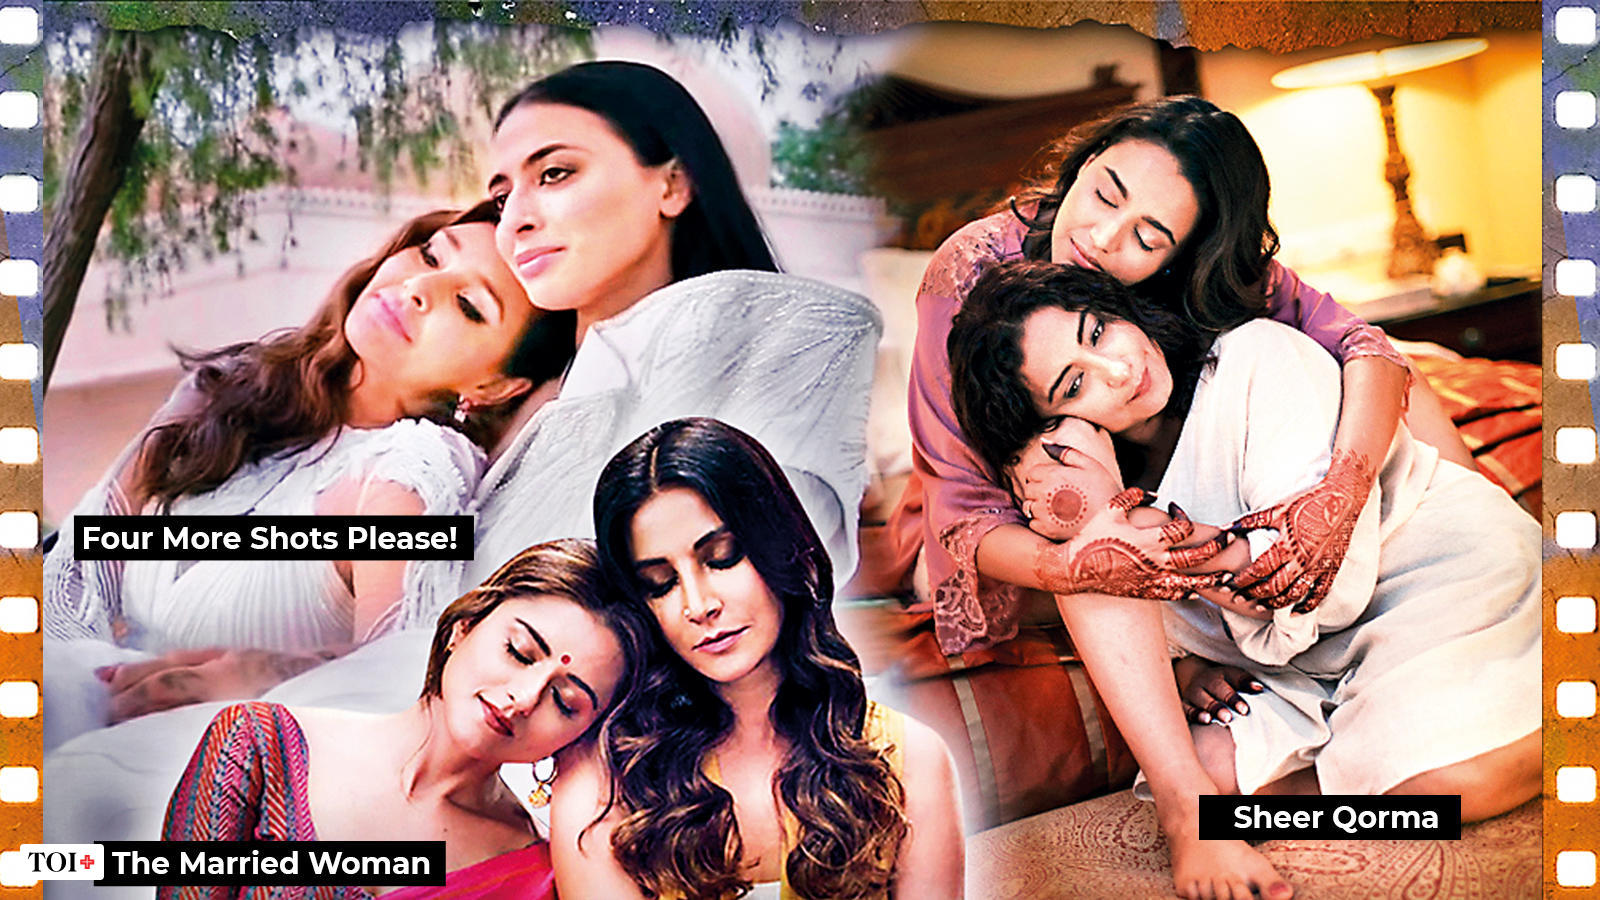 Lesbian love stories are blossoming on screen India News photo